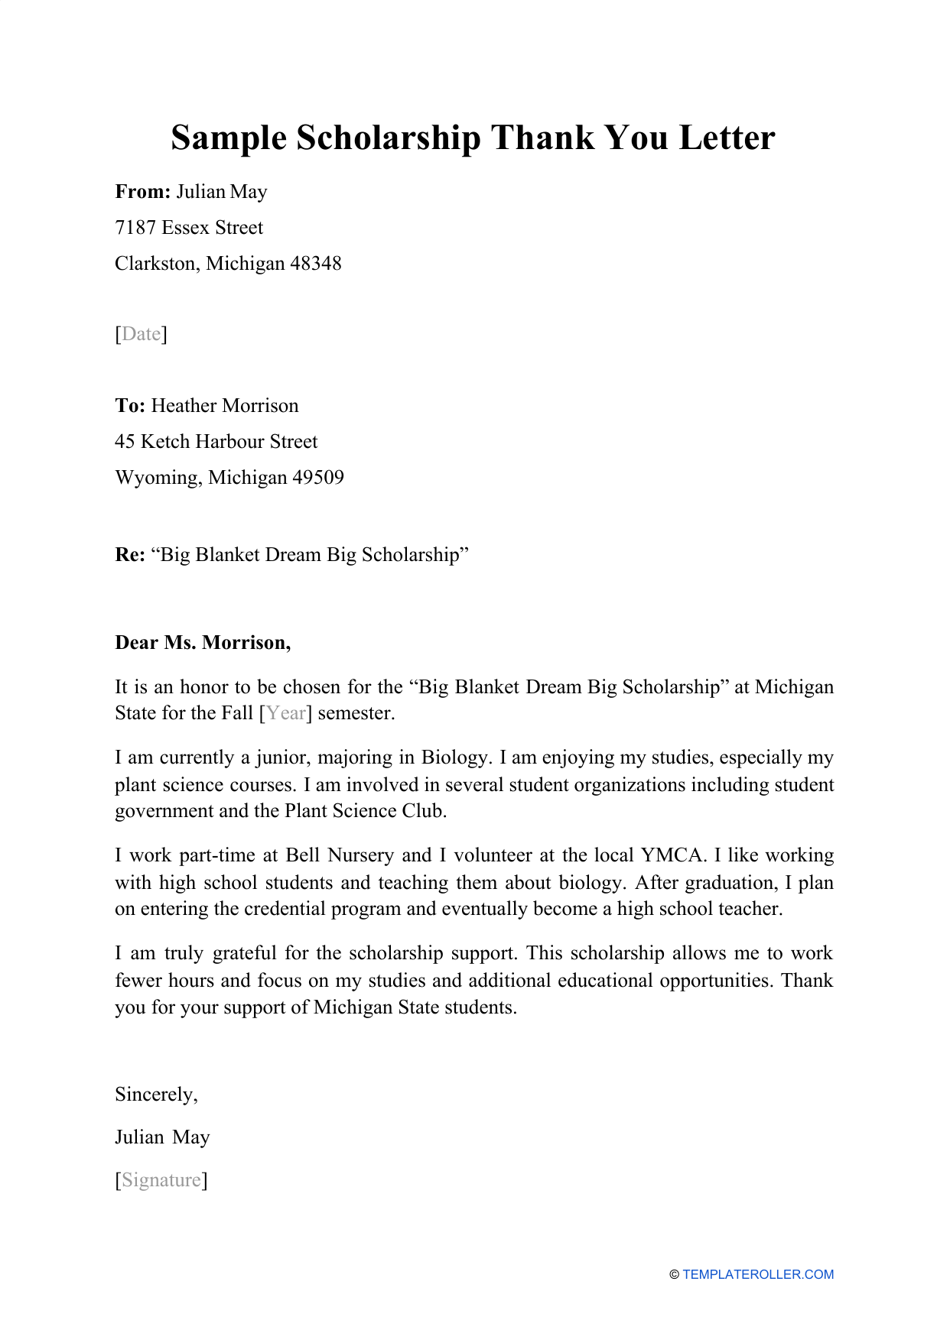 Sample Scholarship Thank You Letter - Template